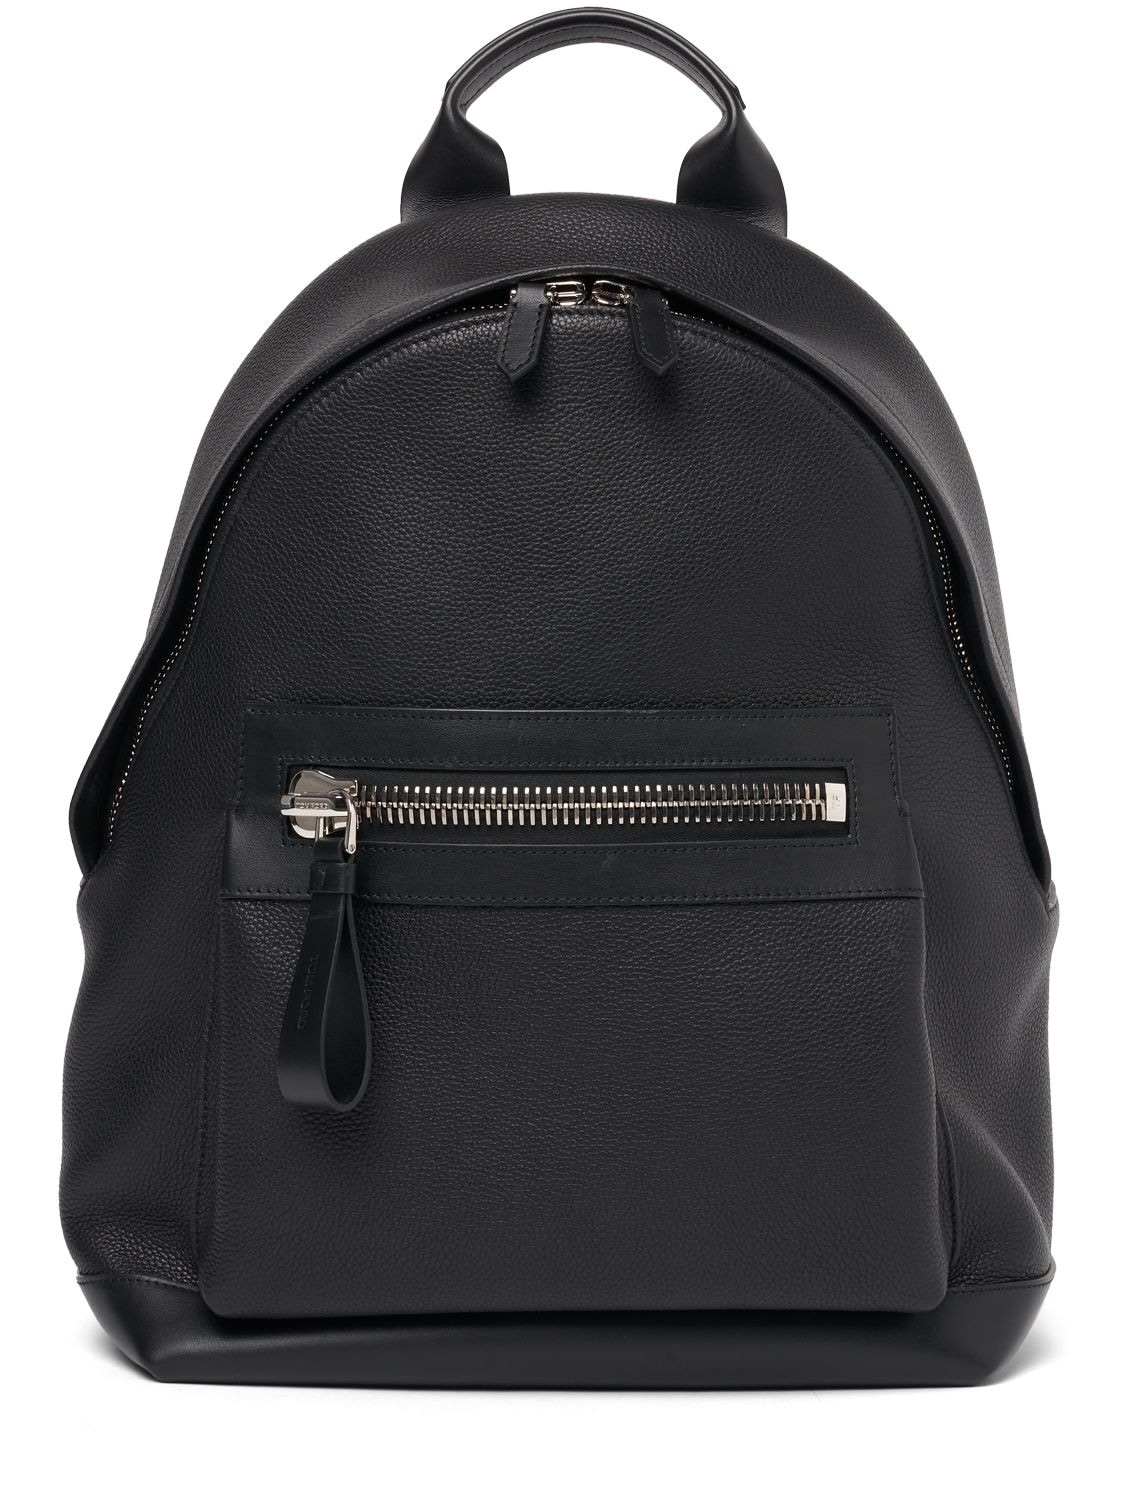 Image of Buckley Soft Grain Leather Backpack